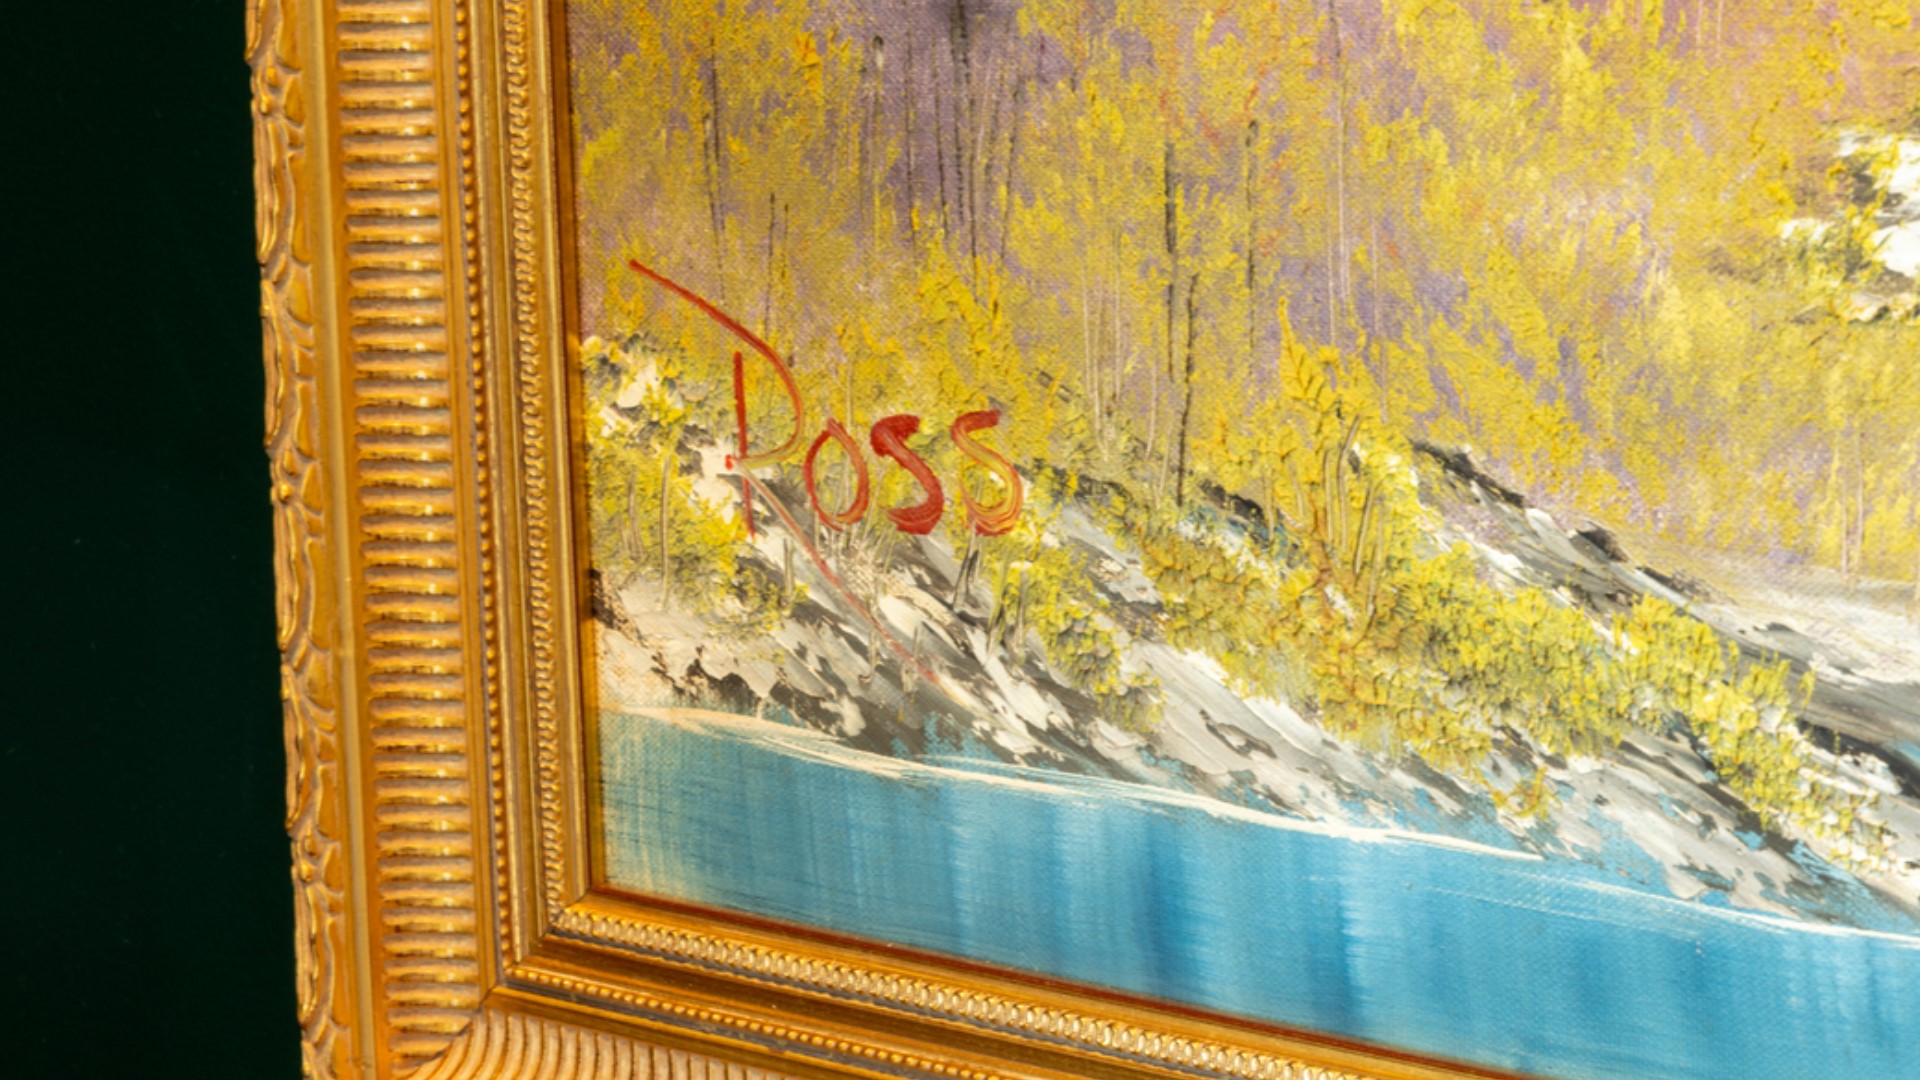 A painting created by cultural icon Bob Ross during the first season of his famous PBS show, “The Joy of Painting,” is now for sale through a Minnesota art dealer.